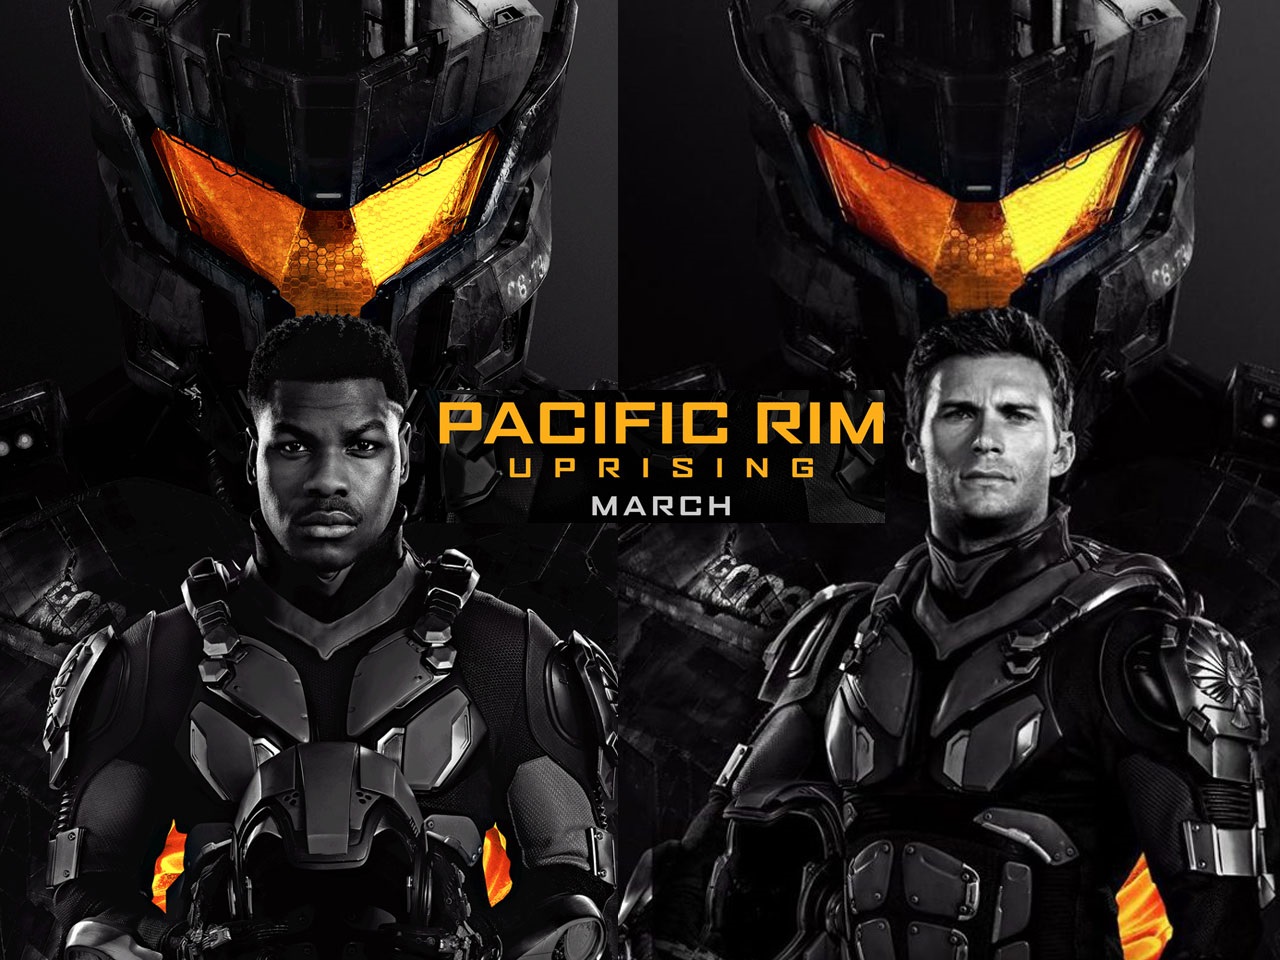 Movies With Michael: Movie Review: Pacific Rim: Uprising